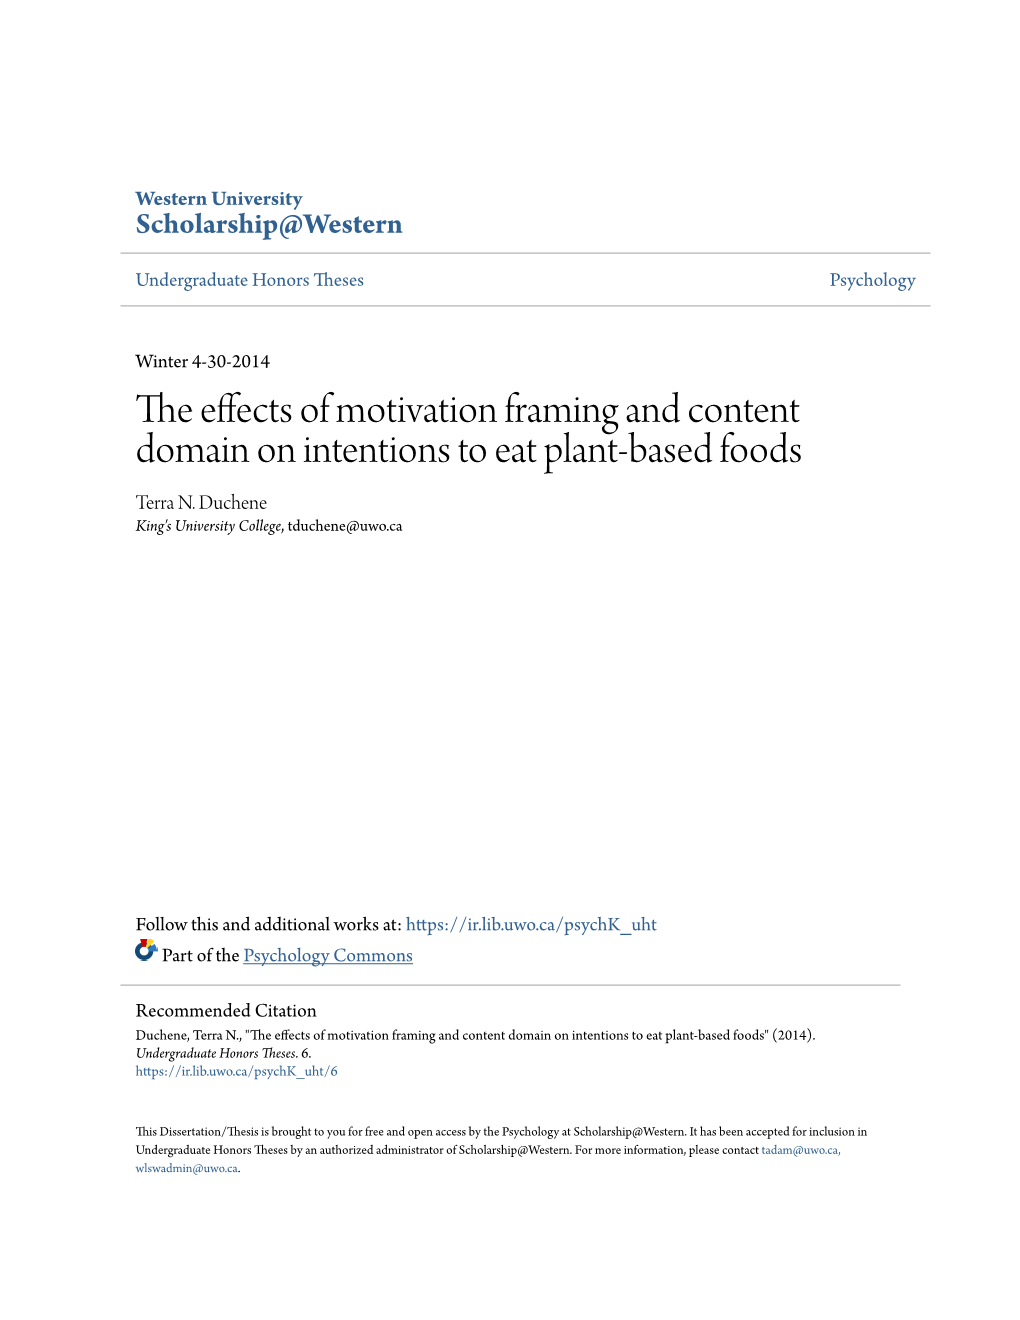 The Effects of Motivation Framing and Content Domain on Intentions to Eat Plant-Based Foods Terra N